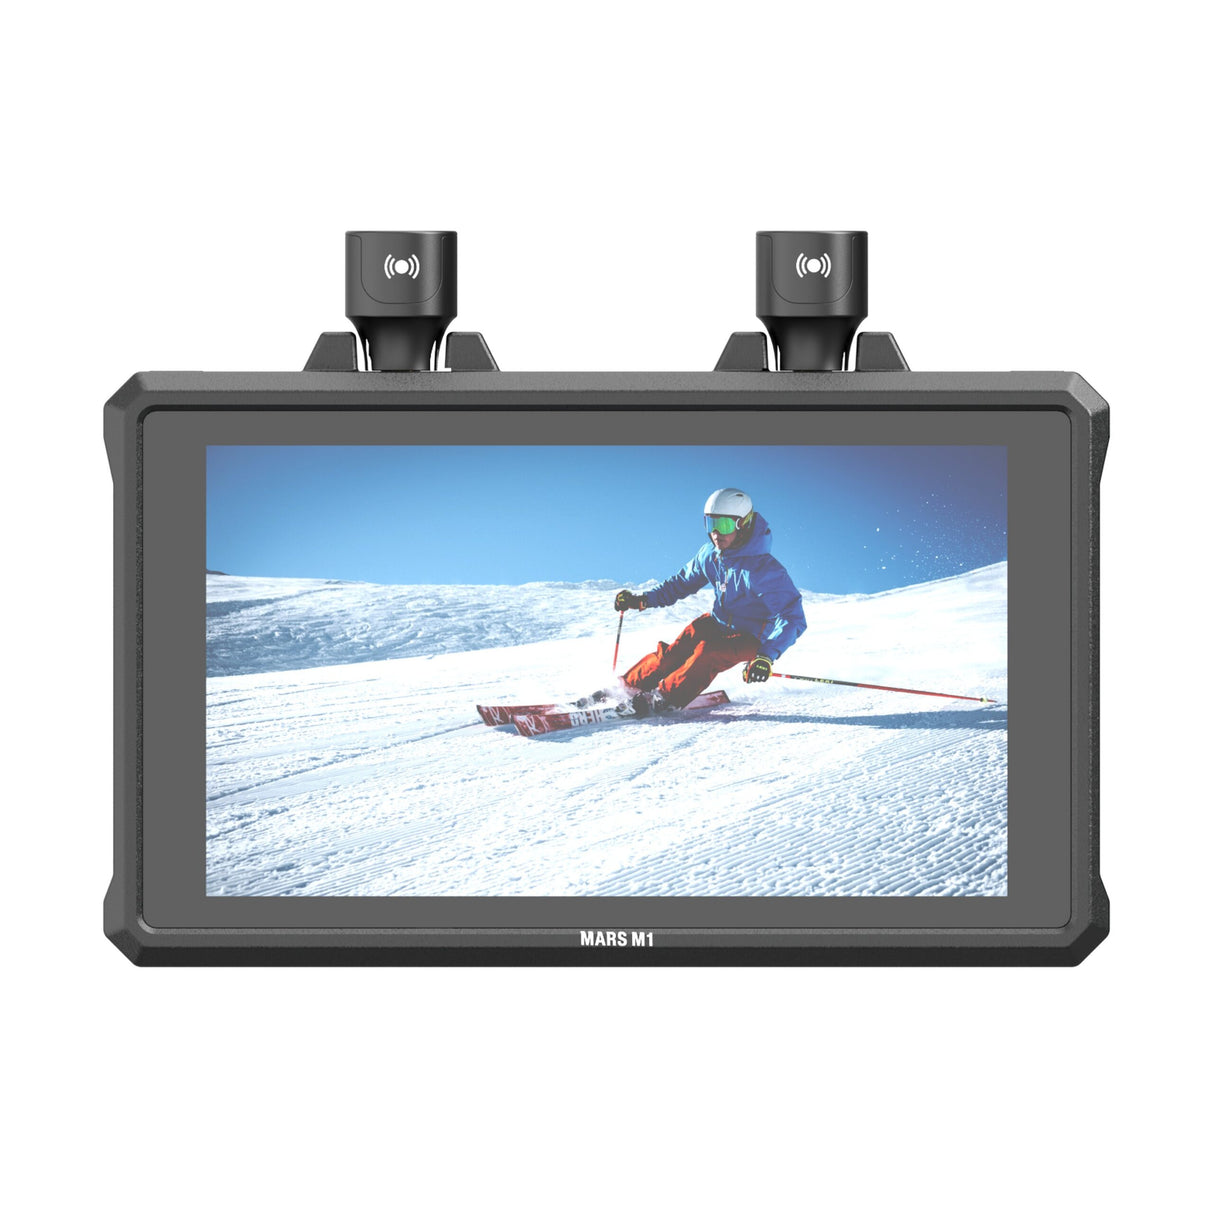 Hollyland Mars M1 5.5-Inch Monitor with Built-in Video Transmitter/Receiver Single Pack